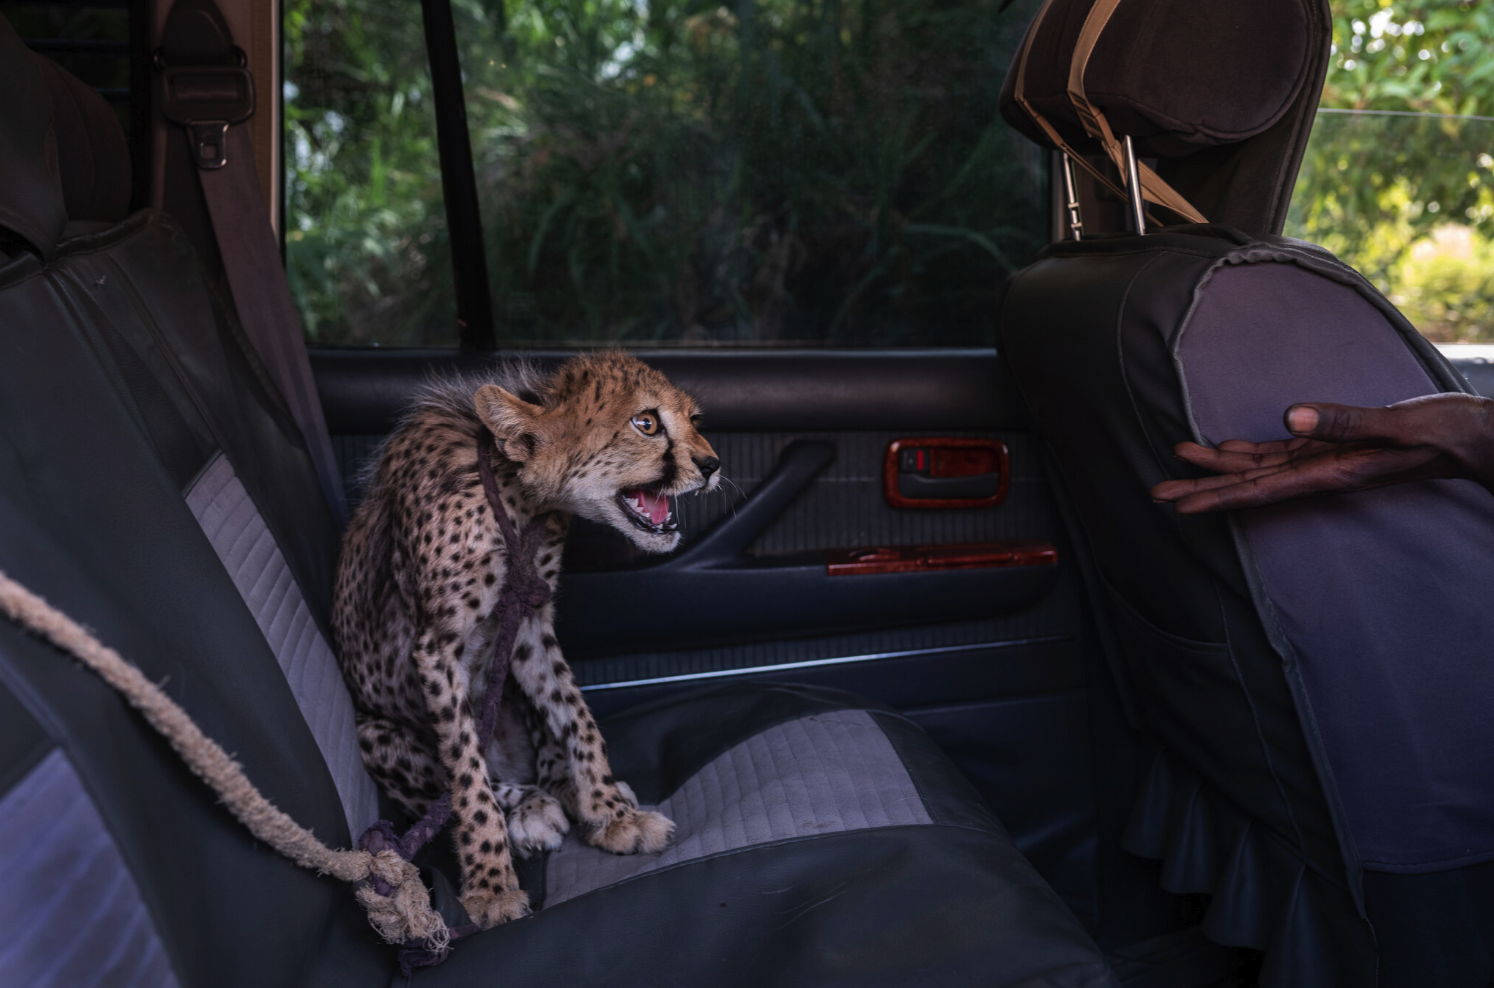 cheetah cub in back seat of car hissing at outstretched hand